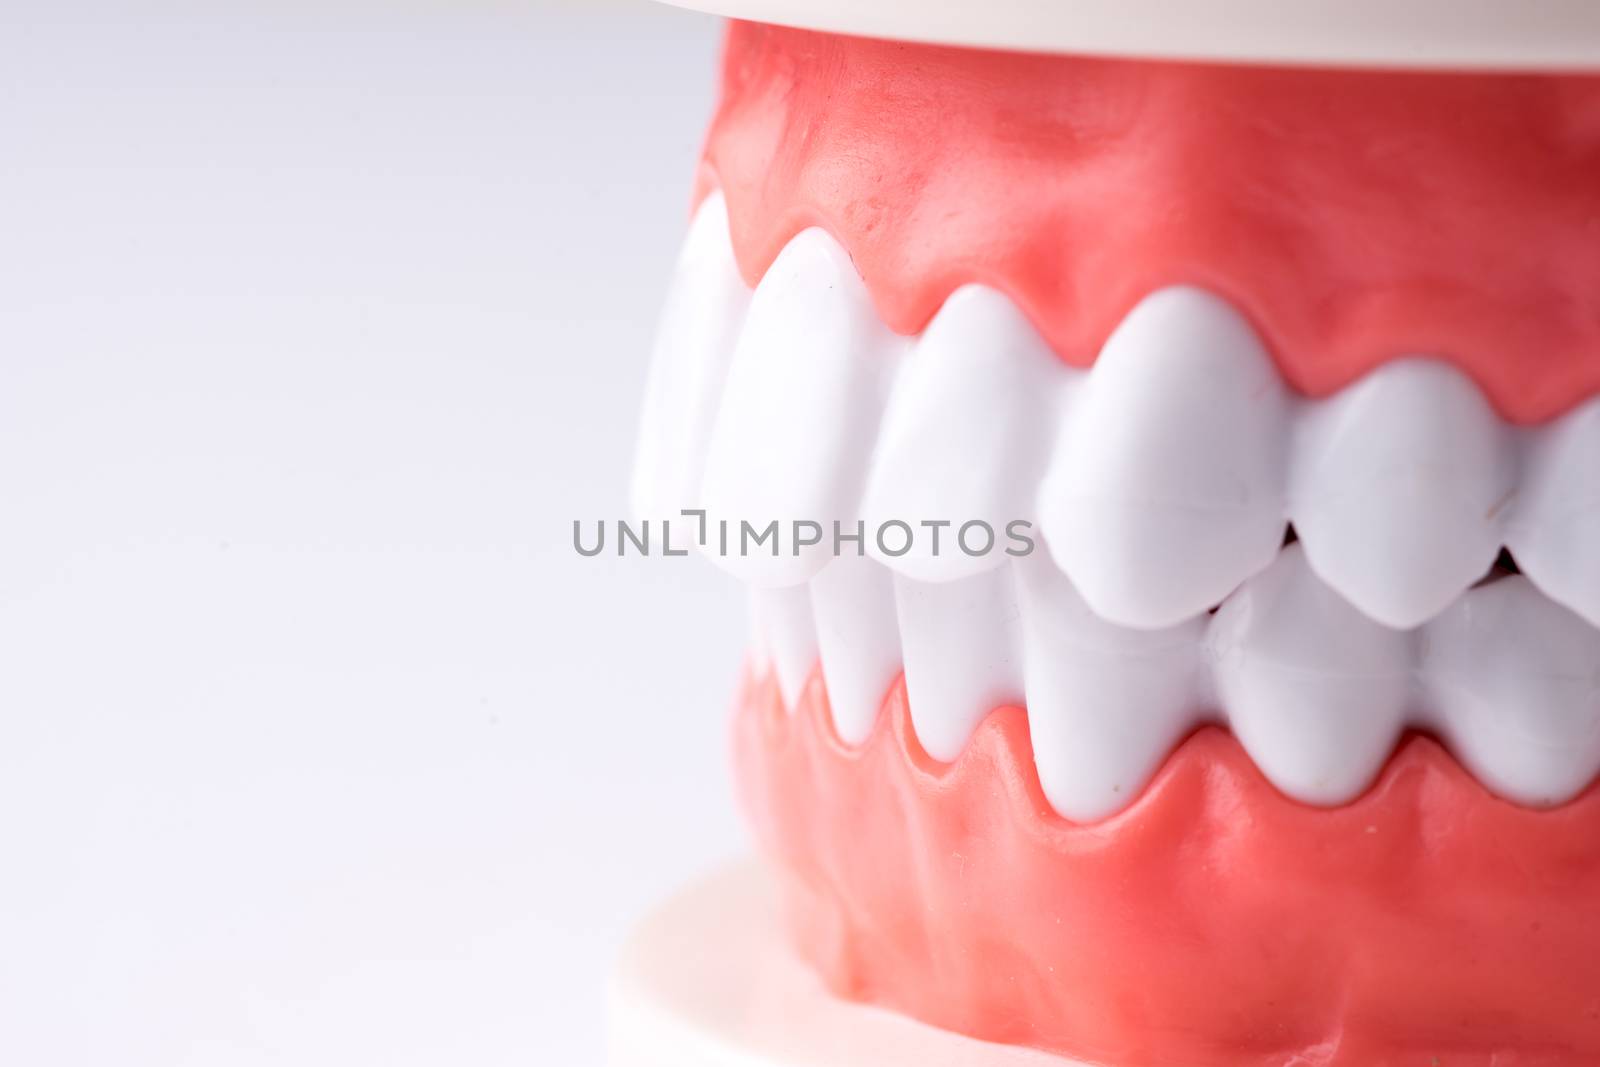 Set of Dentist's equipment tools, denture showing implant by Alicephoto